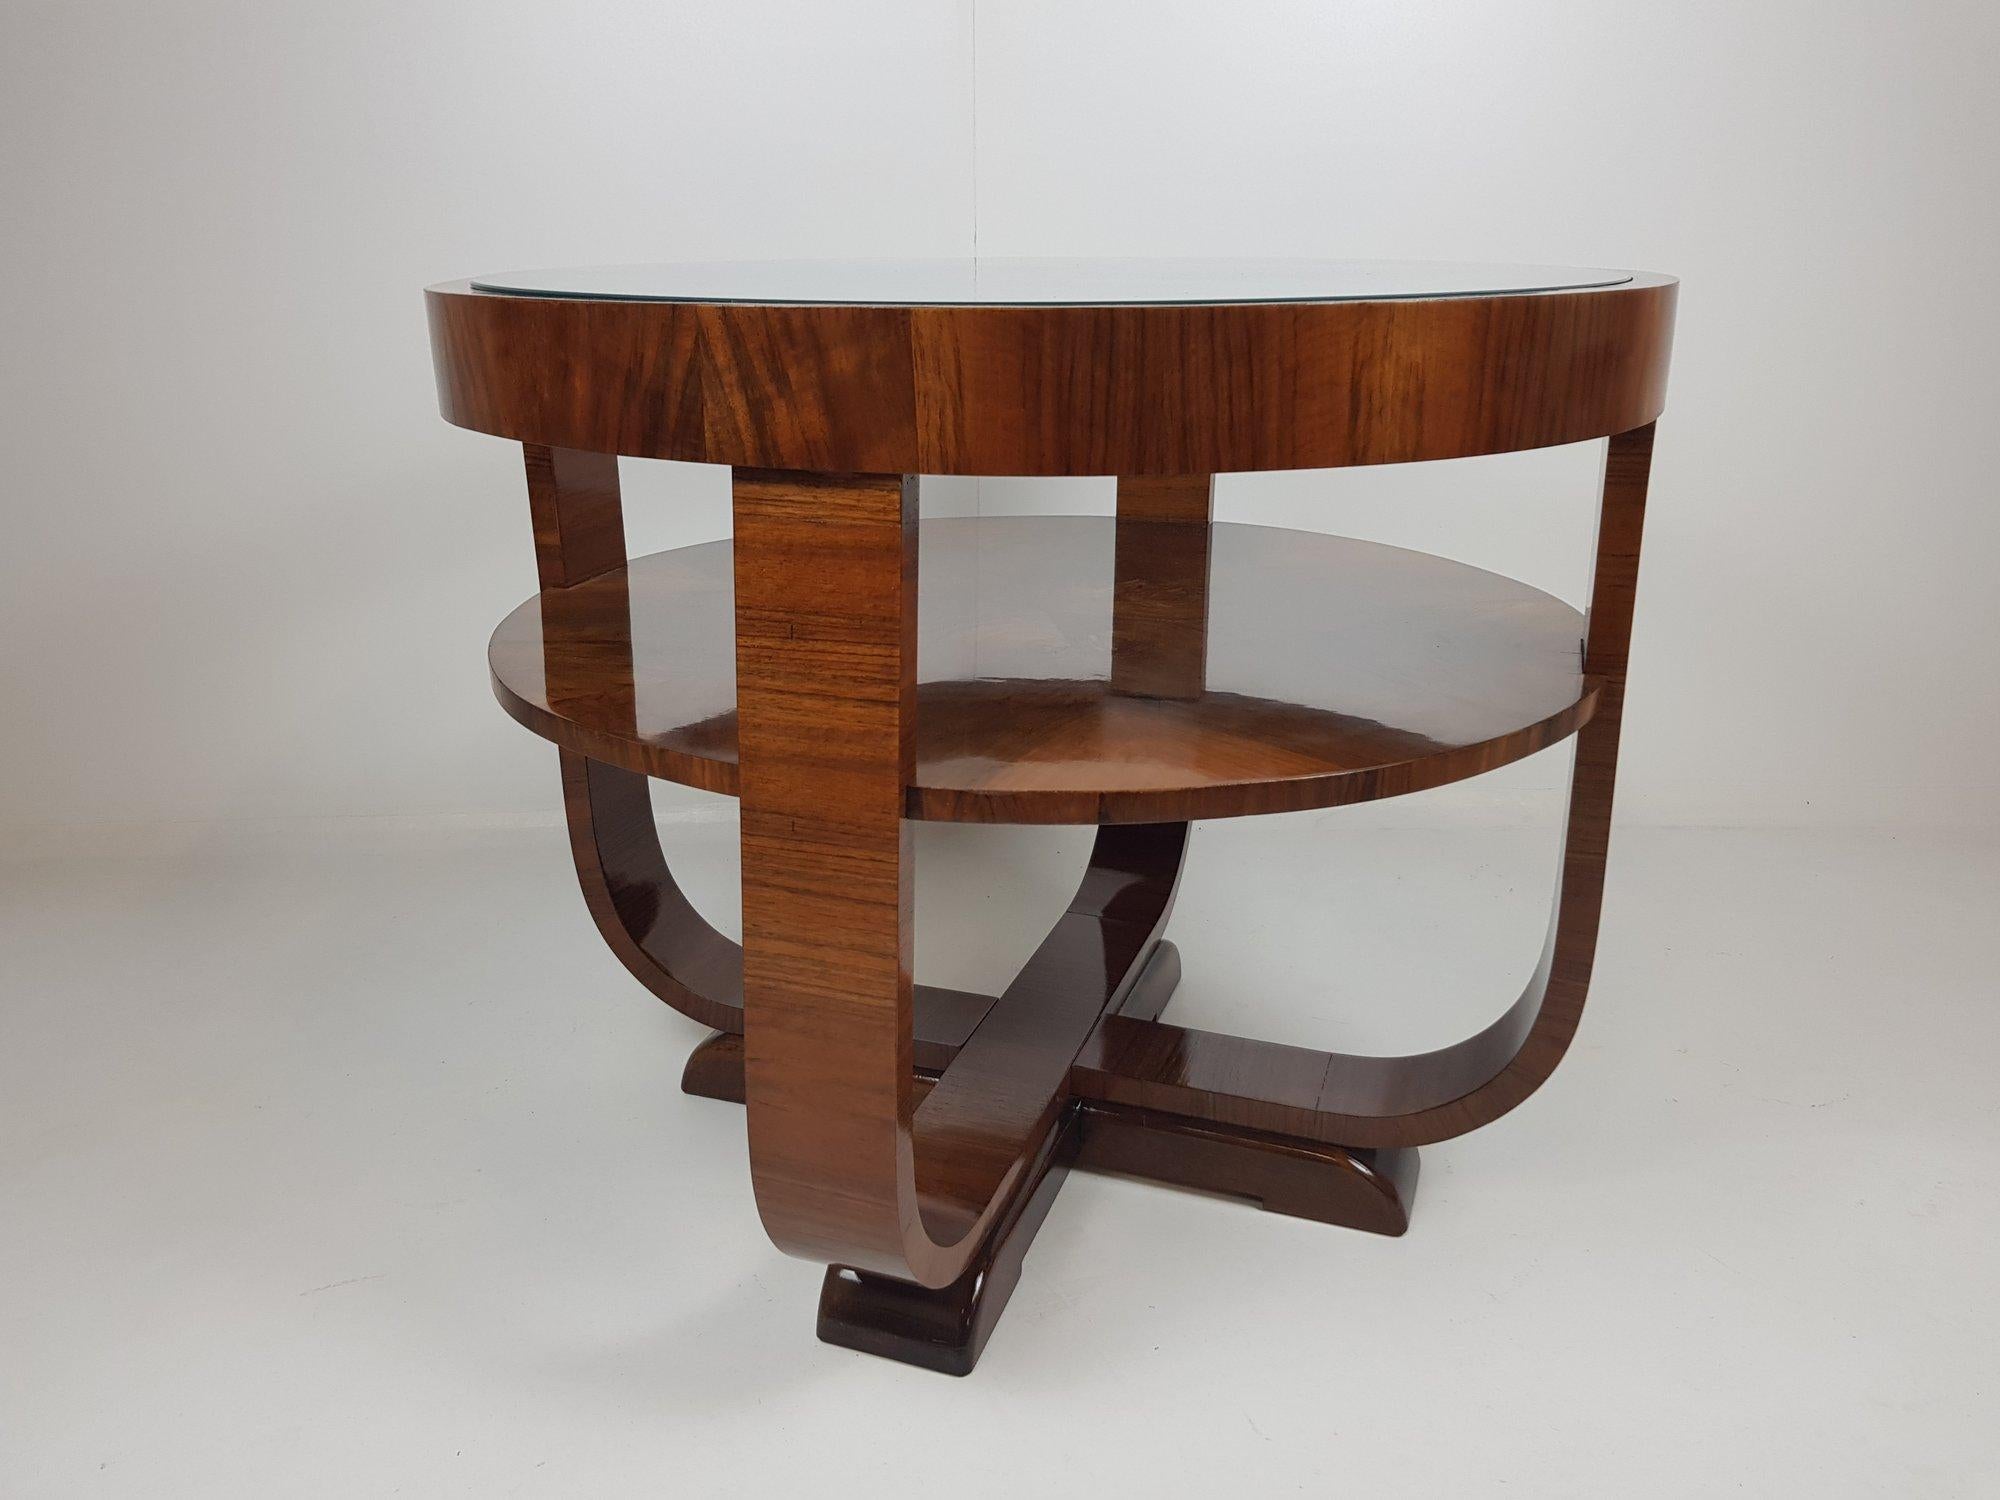 Beautiful round coffee table from walnut veneer made by Thonet (catalogued) in Czechoslovakia in the 1930's.